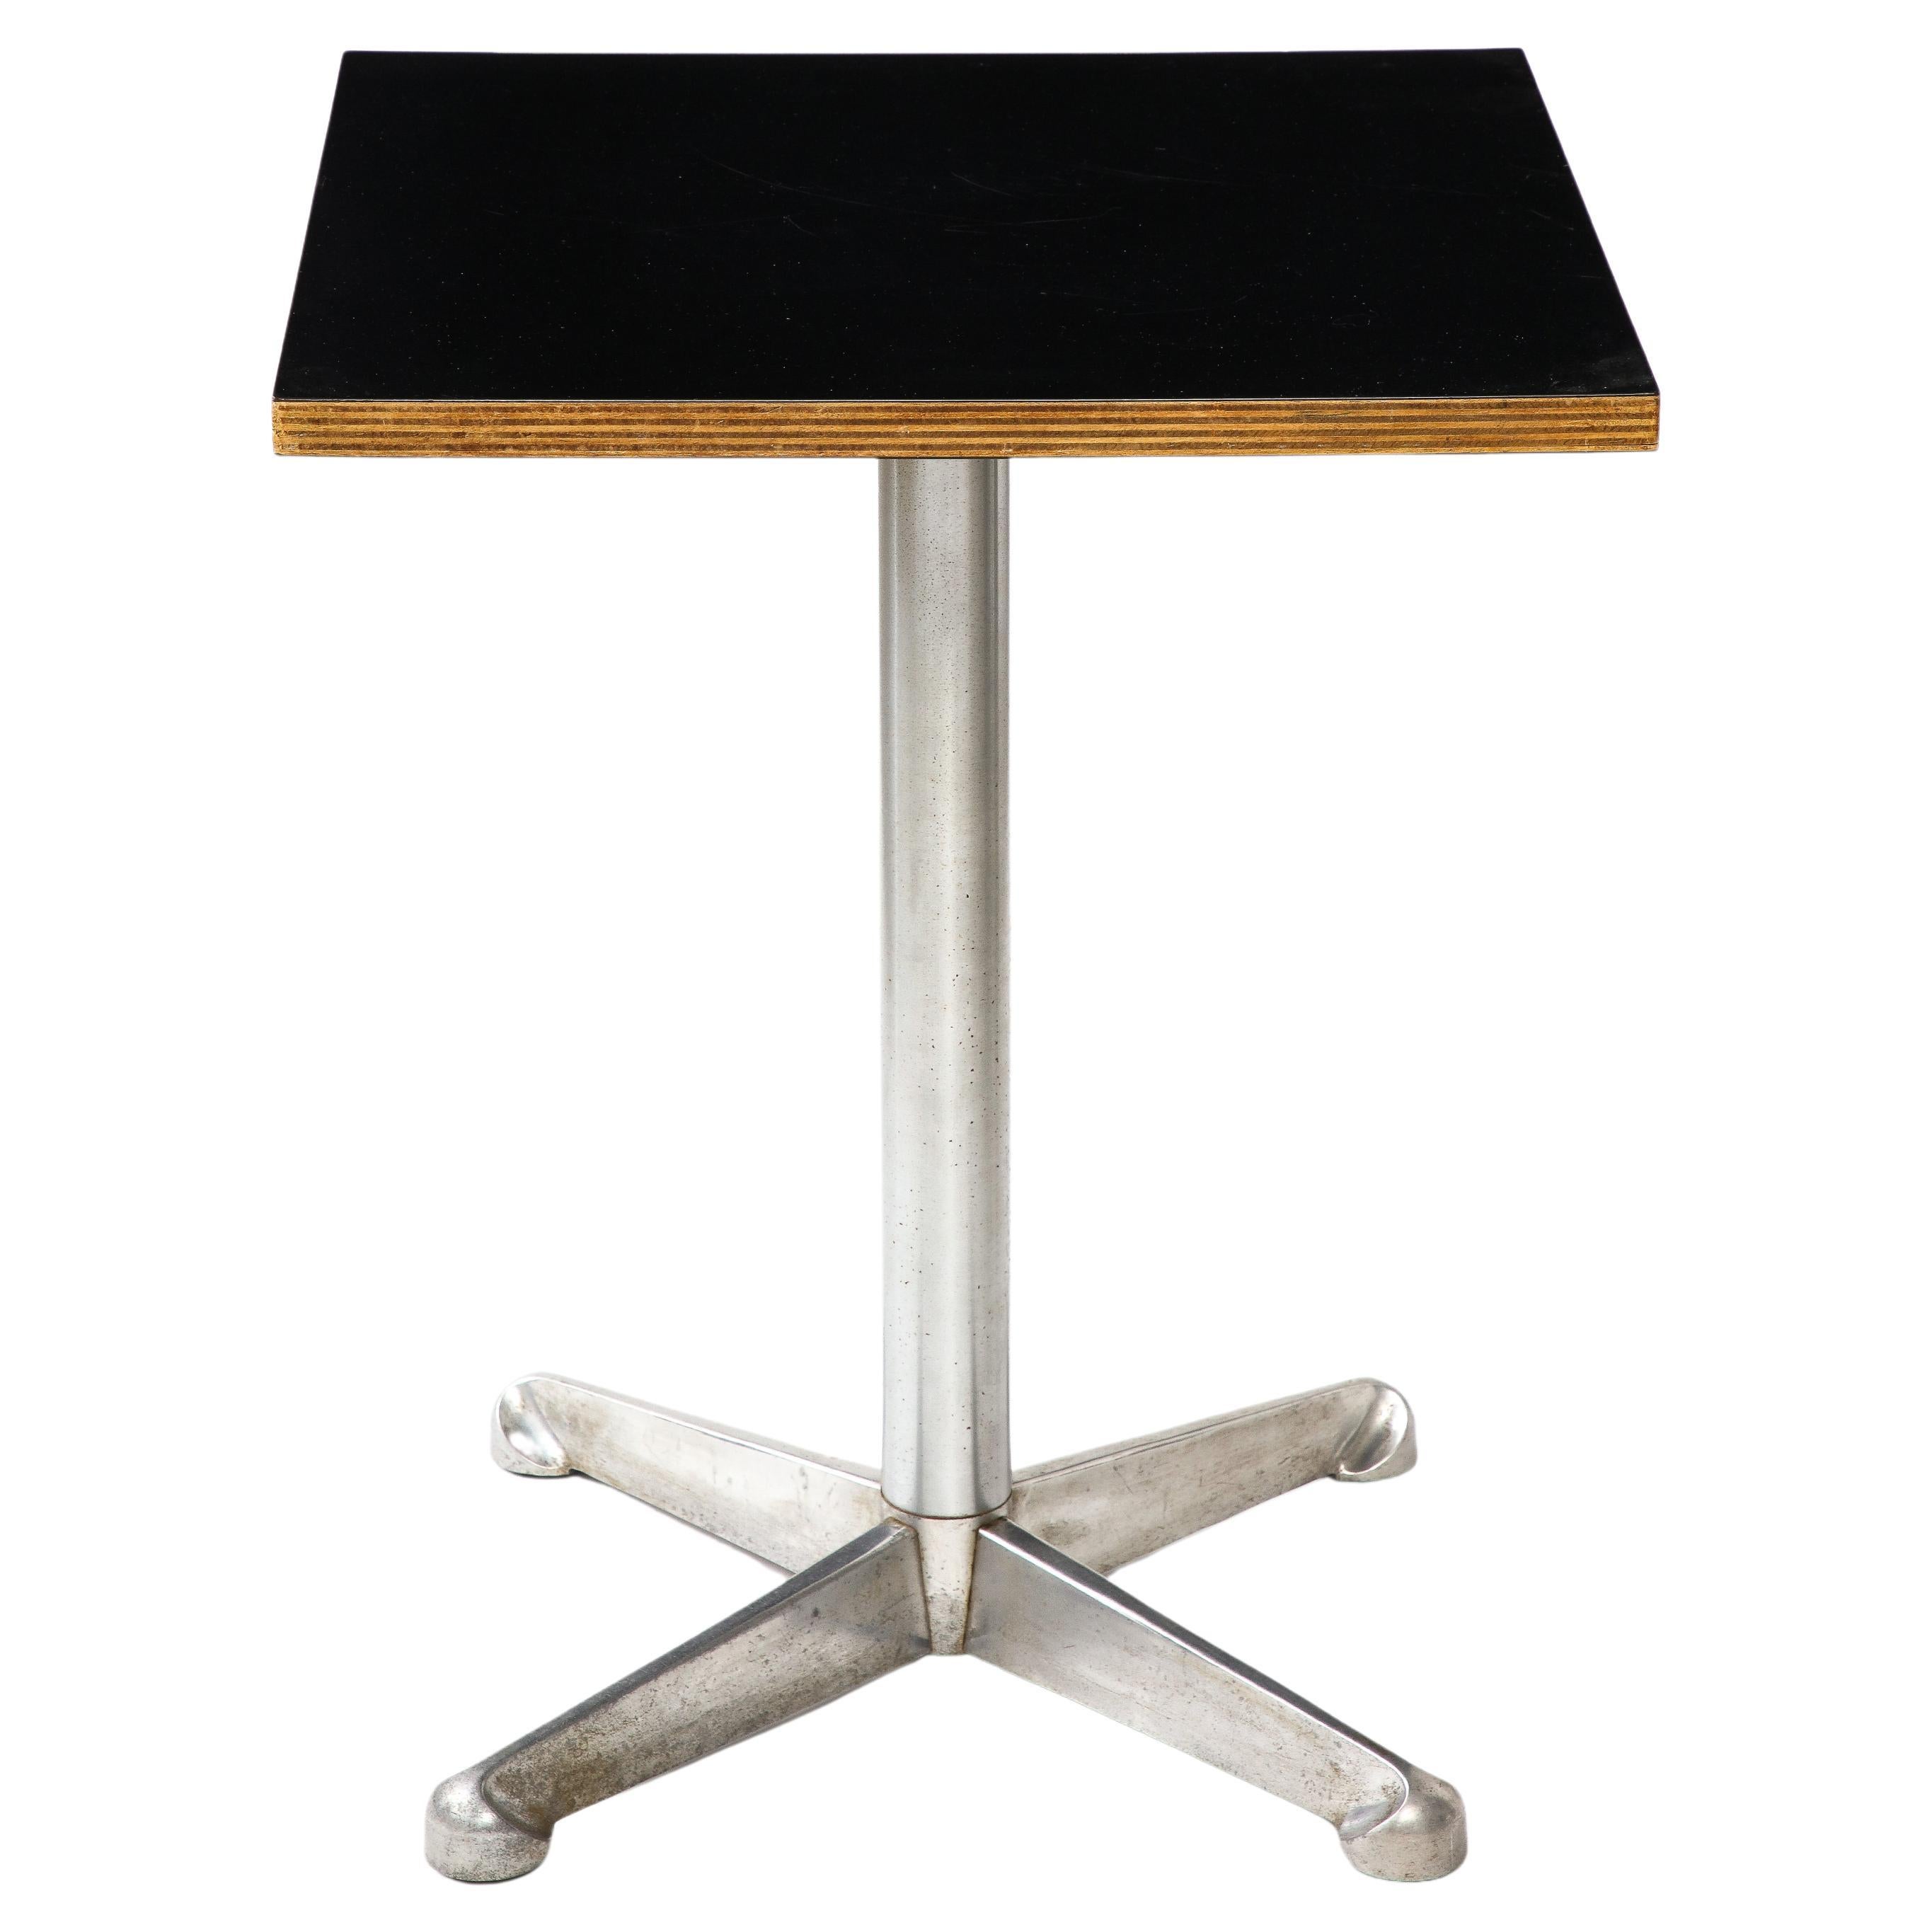 Steel and Laminate Side Table by Tecno, Italy, c. 1960